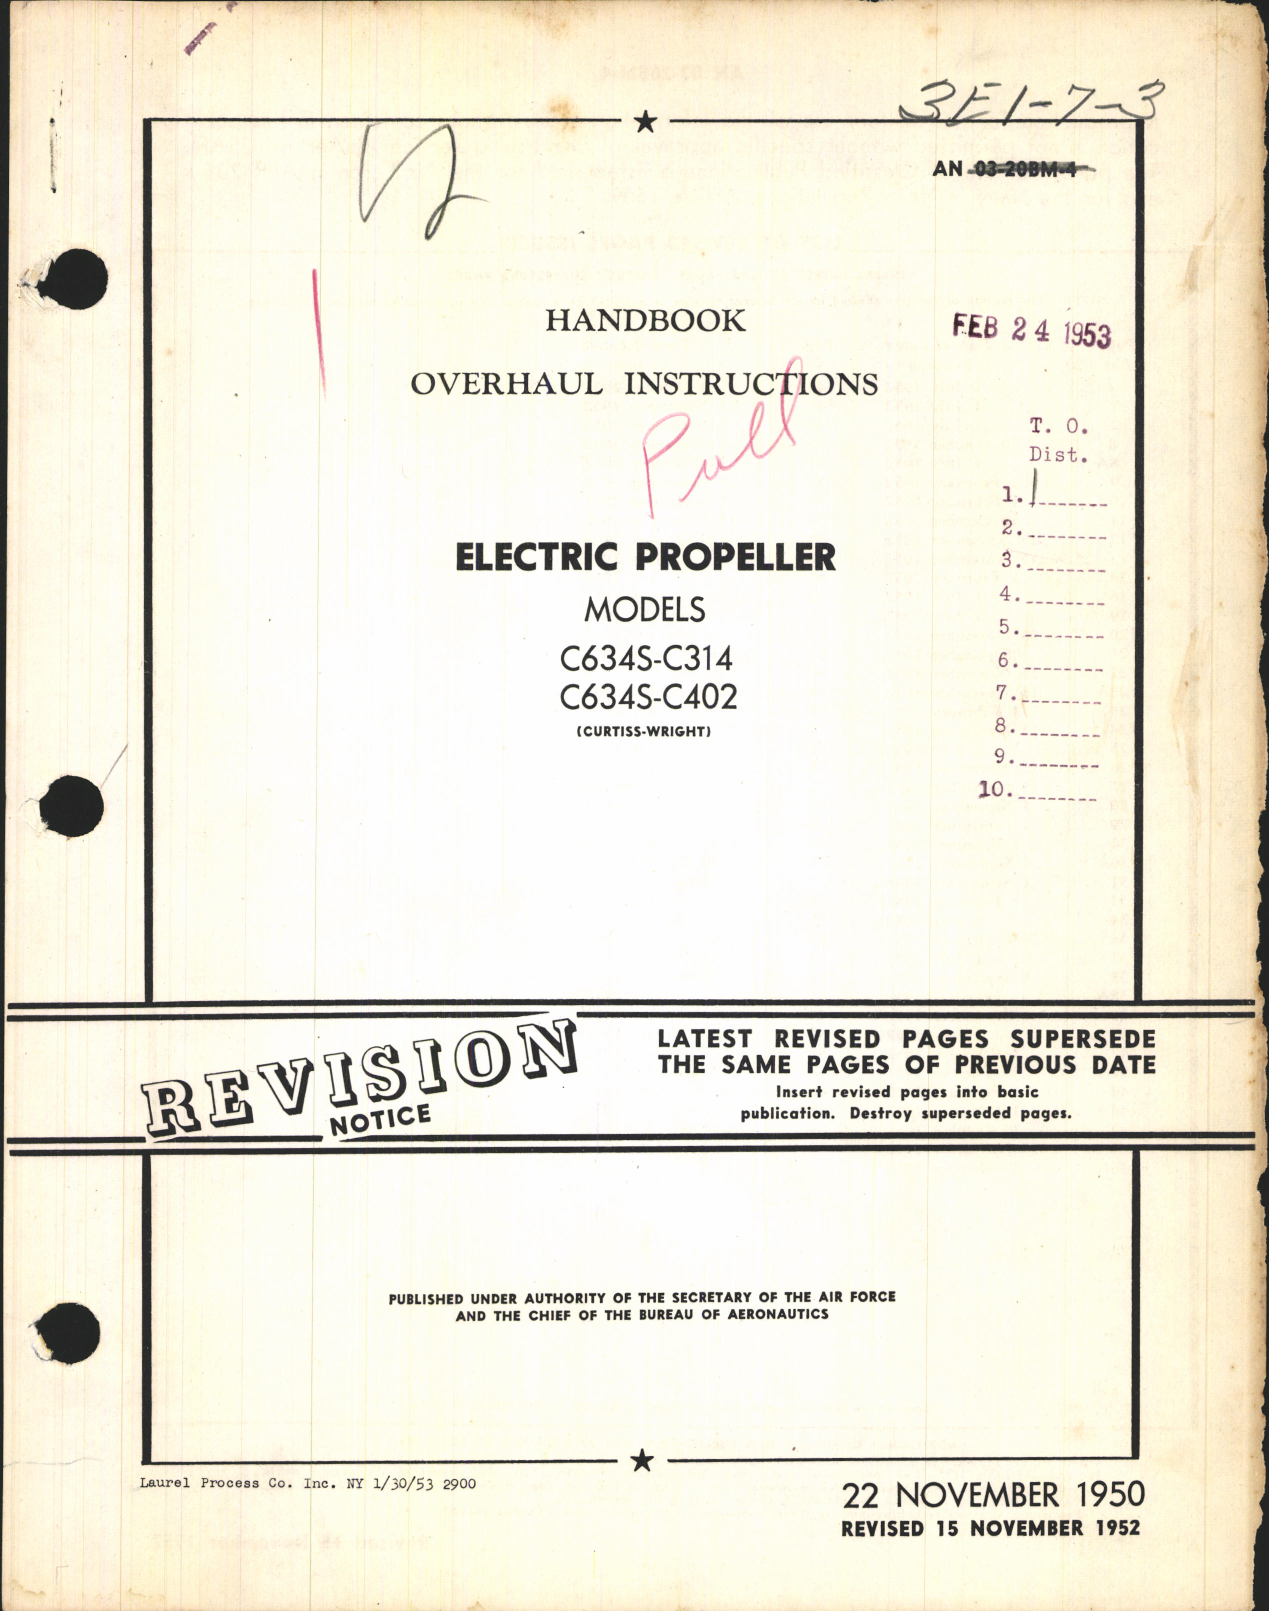 Sample page 1 from AirCorps Library document: Overhaul Instructions for Electric Propeller Models C634S-C314 and C634S-C402